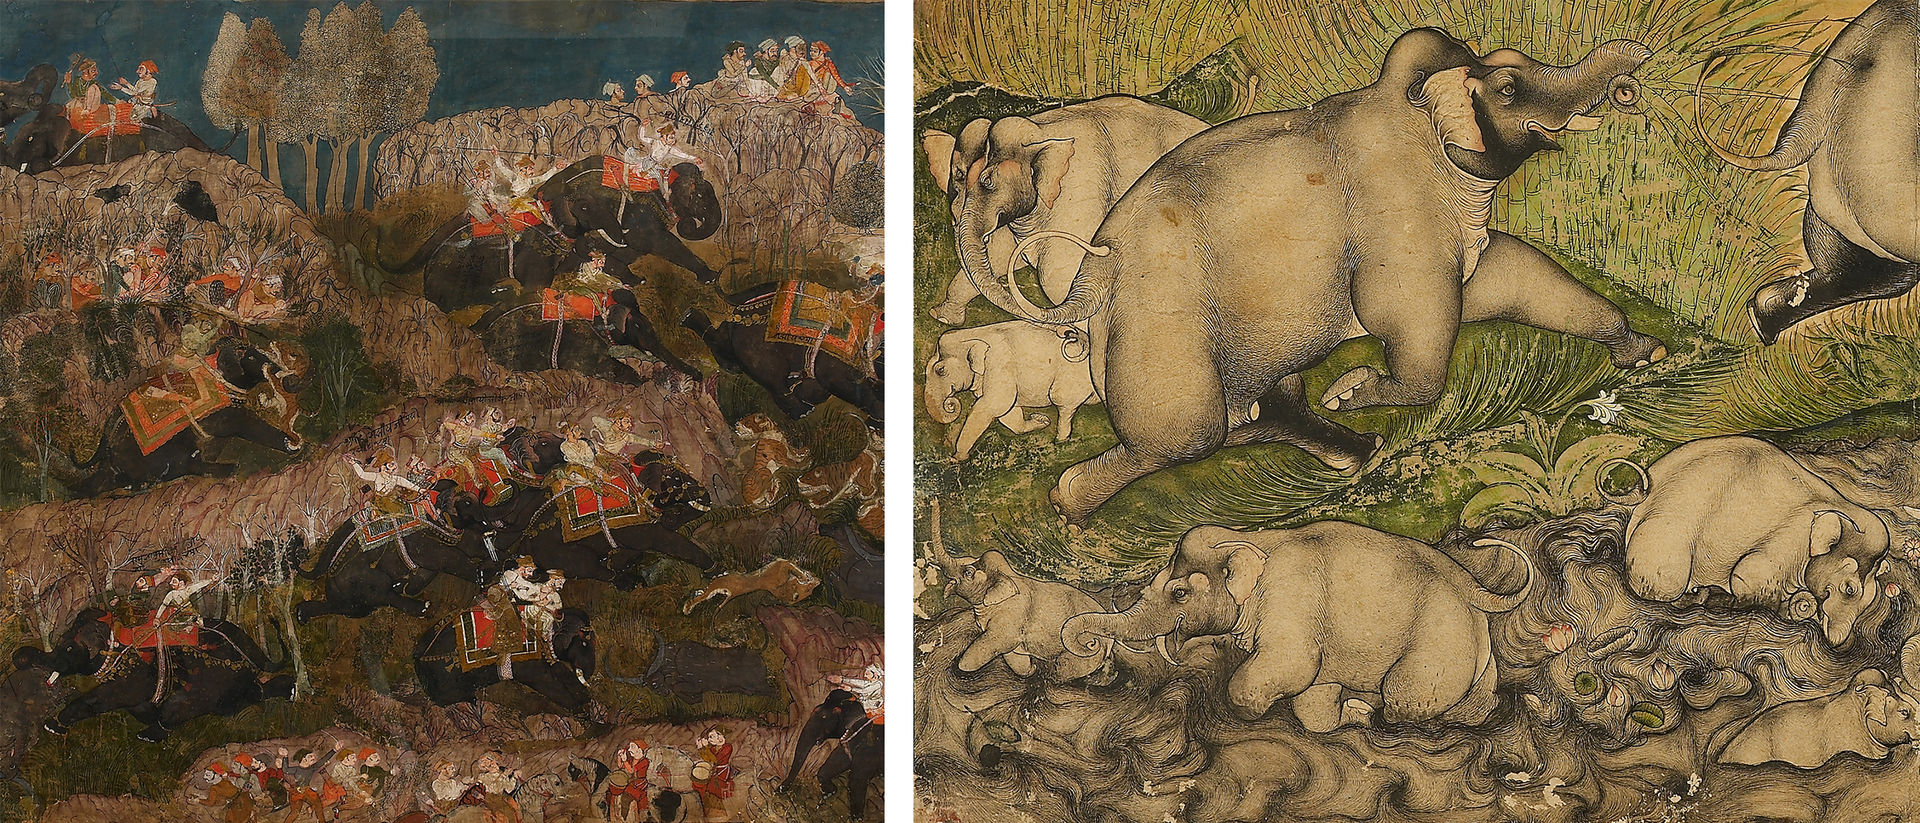 painting of elephants in a forest on left and painting of elephants bathing on the right